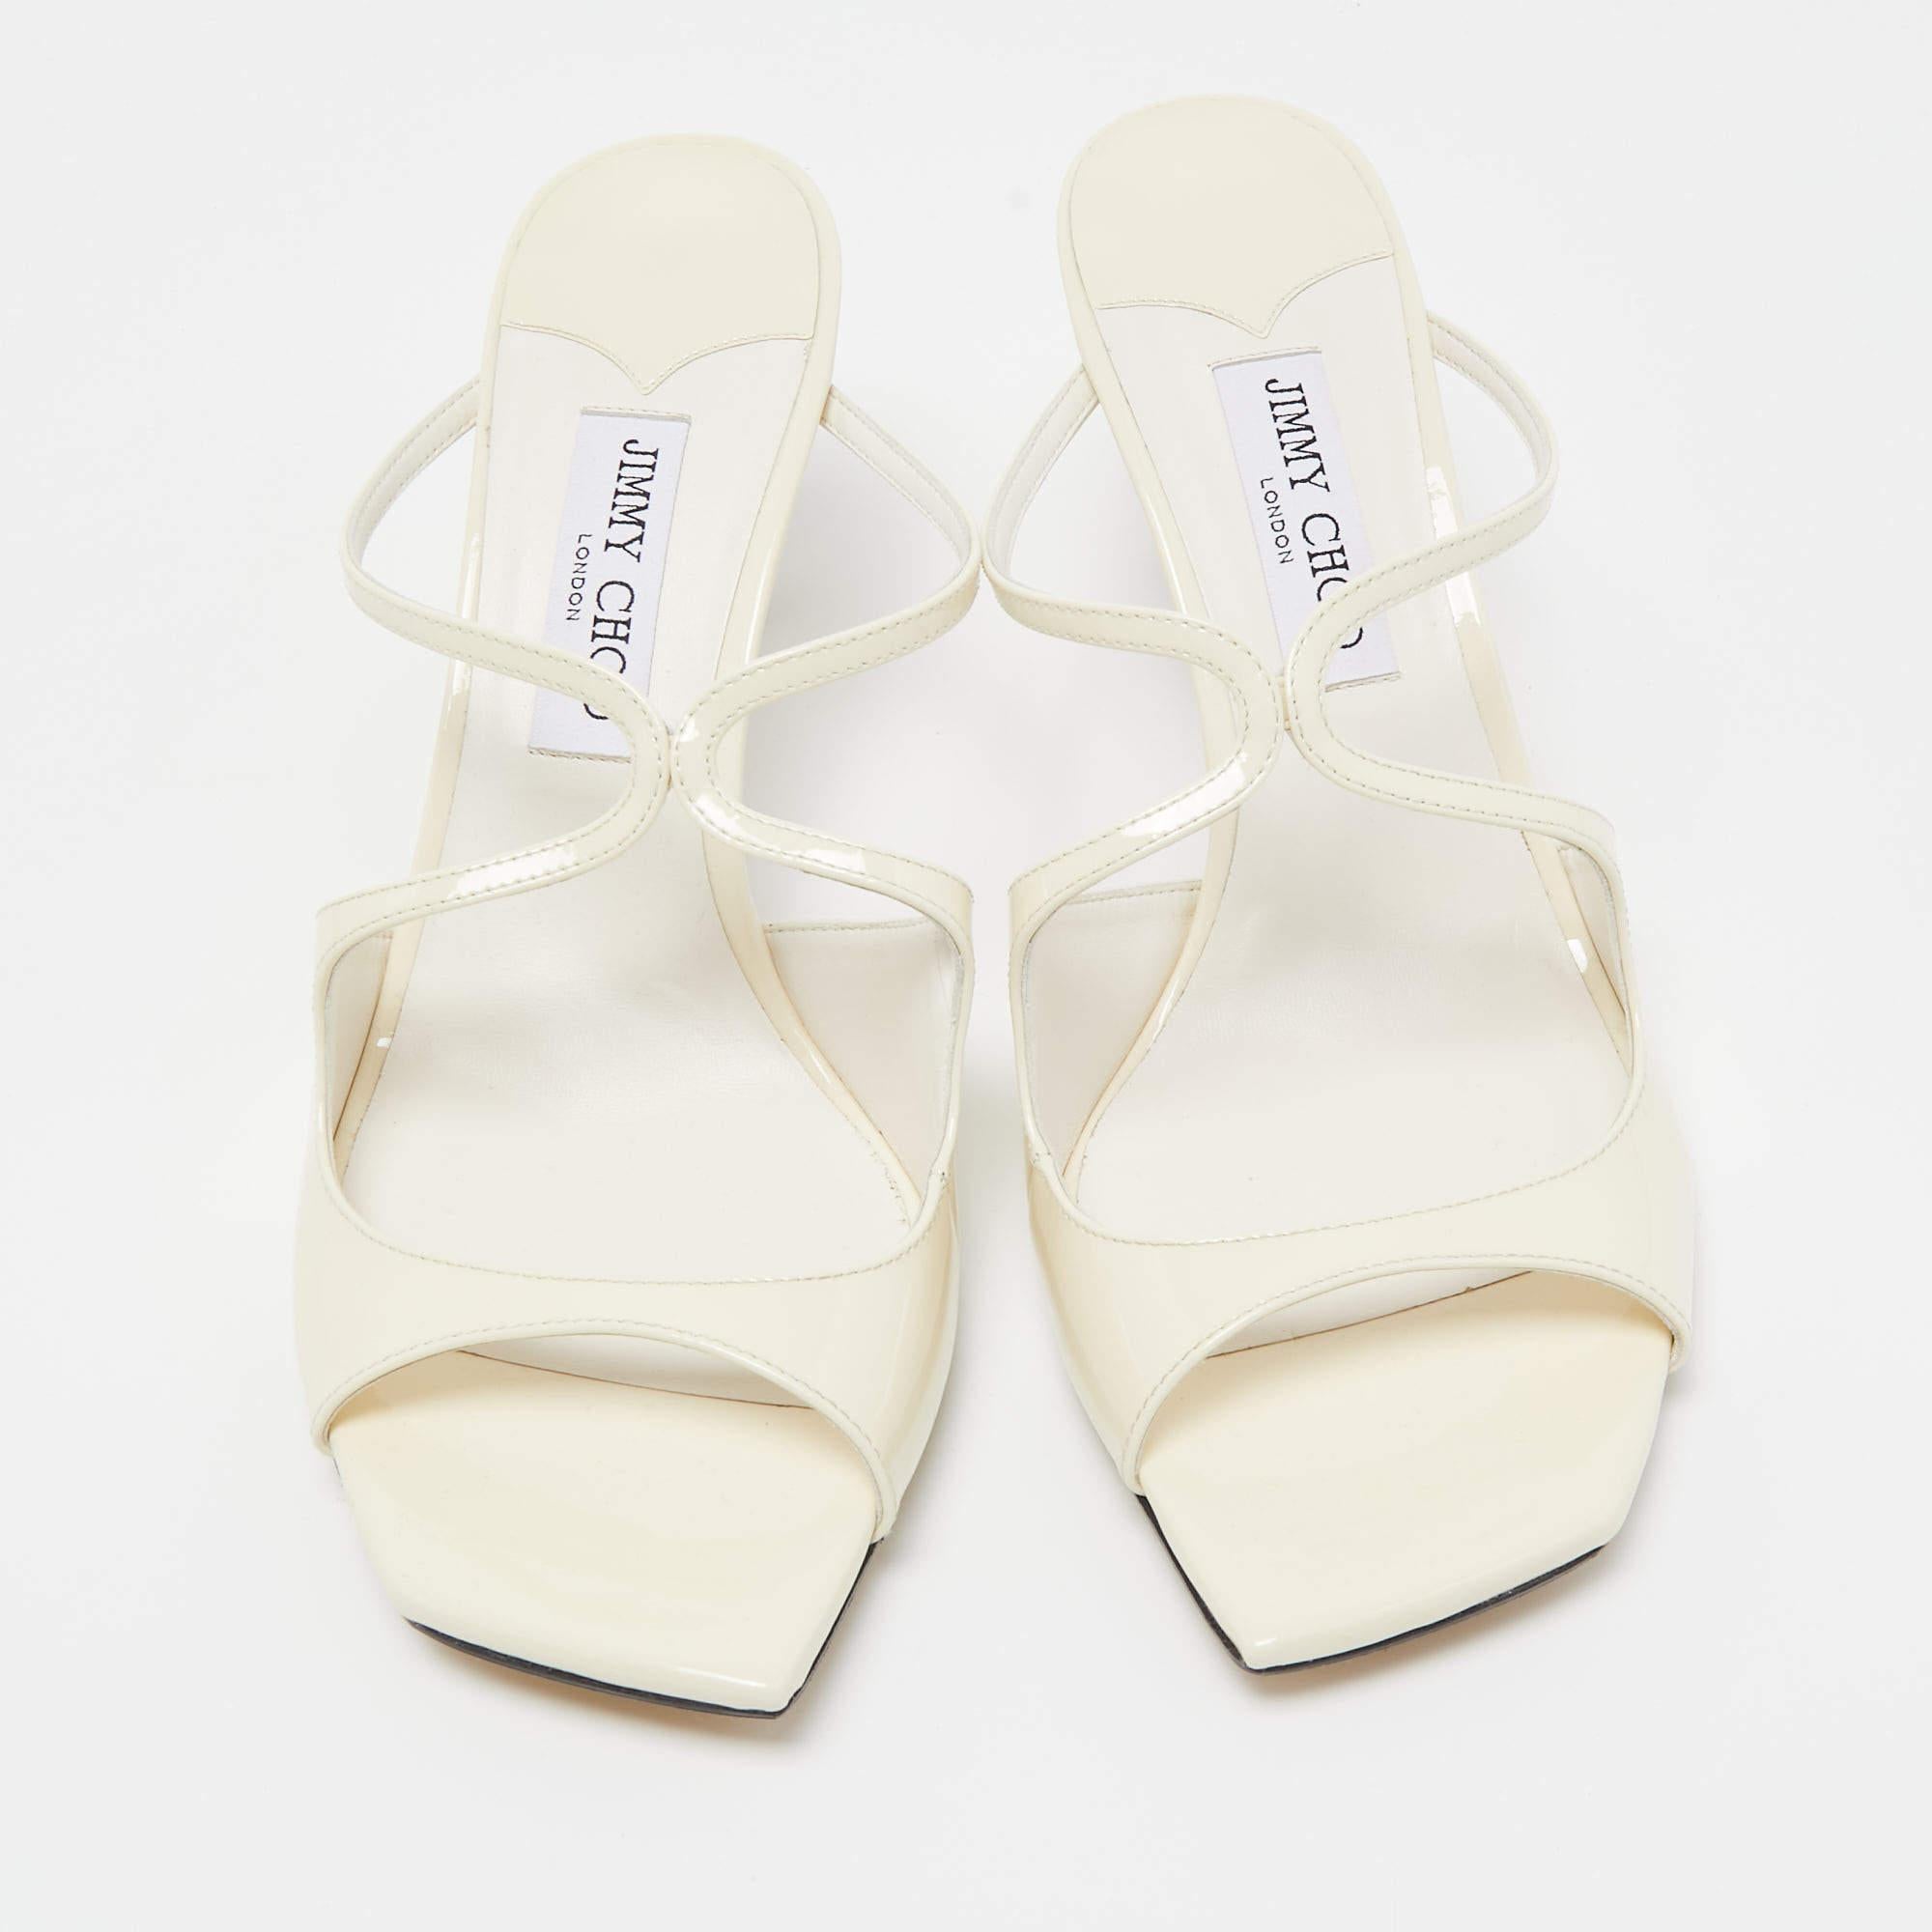 The fashion house’s tradition of excellence, coupled with modern design sensibilities, works to make these sandals a fabulous choice. They'll help you deliver a chic look with ease.

